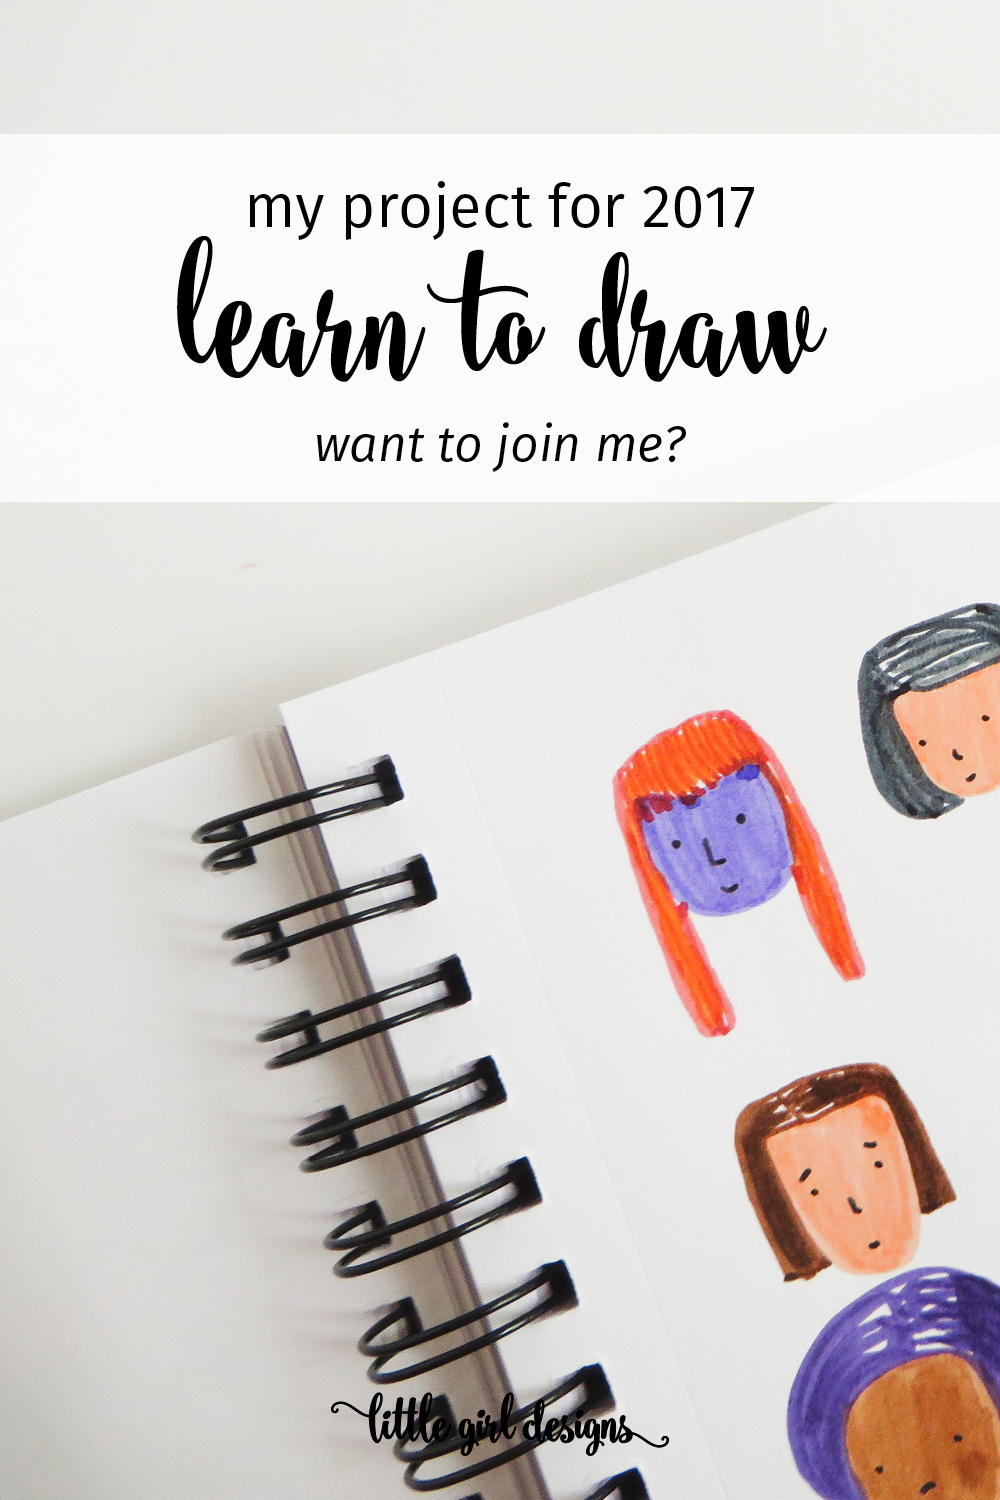 Want to join me this year in learning to draw? I'll be sharing techniques and resources that I'm using on my way to becoming a better artist.